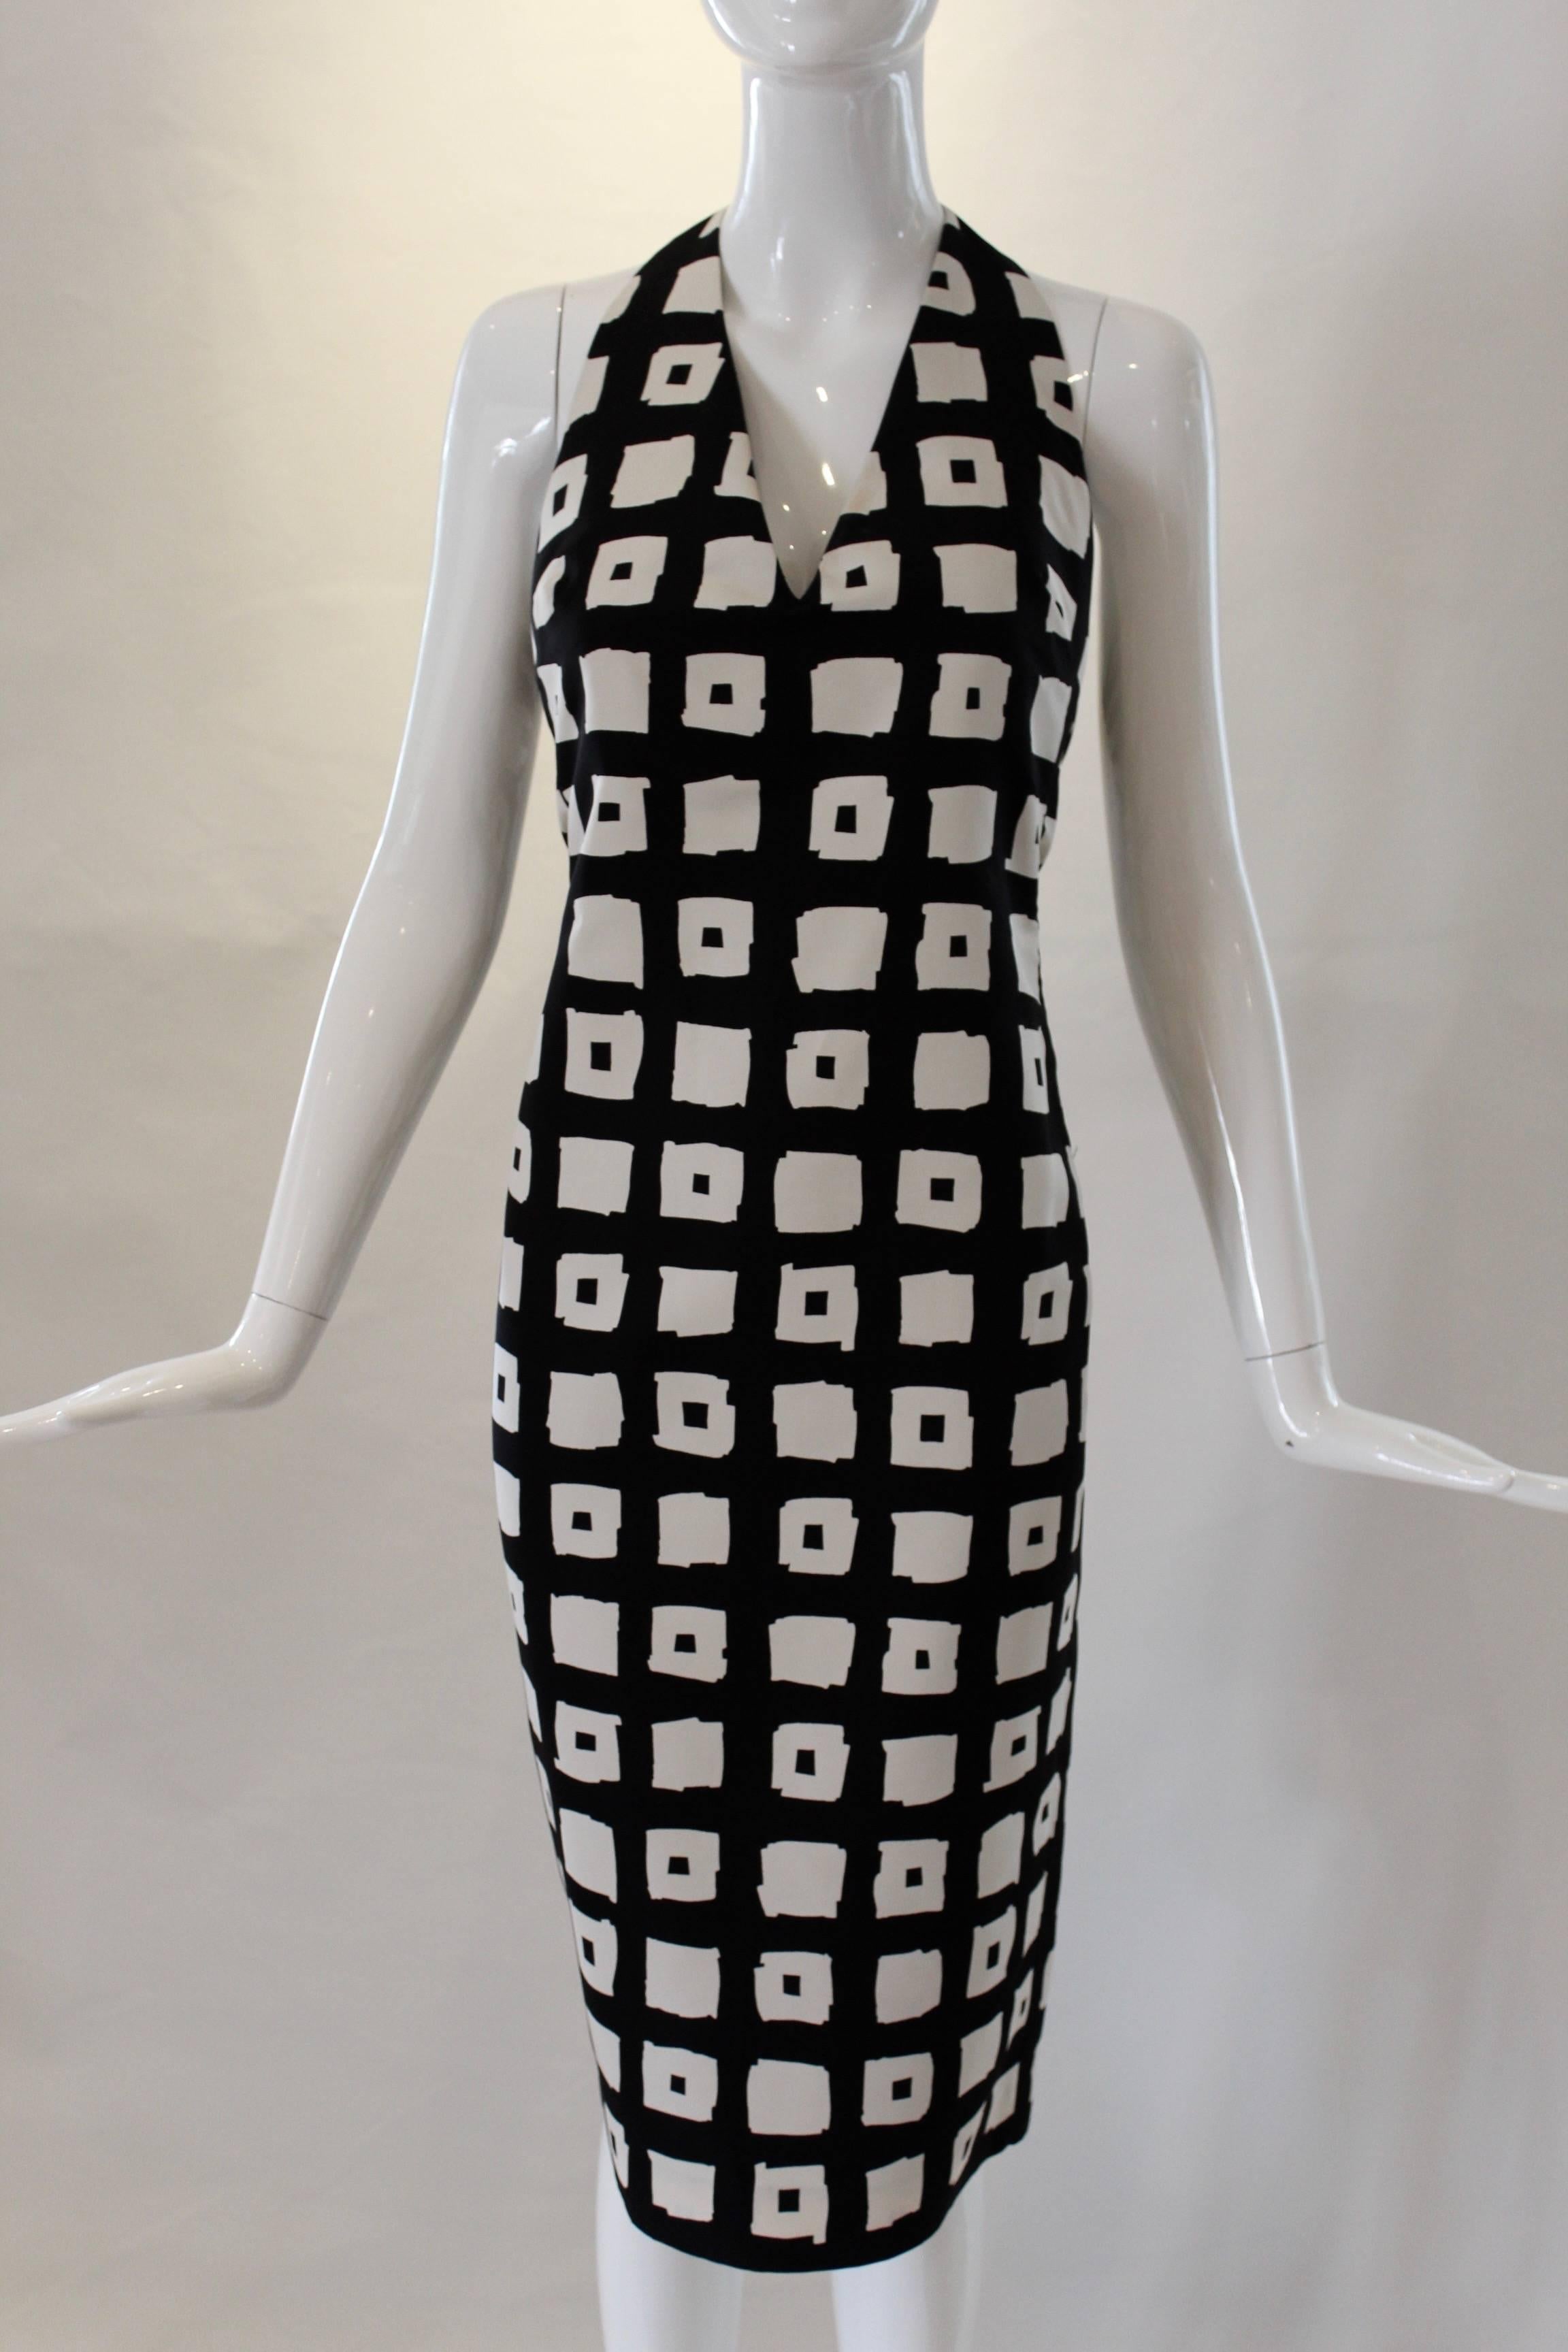 Gianfranco Ferre Braided Back Halter Dress, 1980s  In Good Condition For Sale In Houston, TX